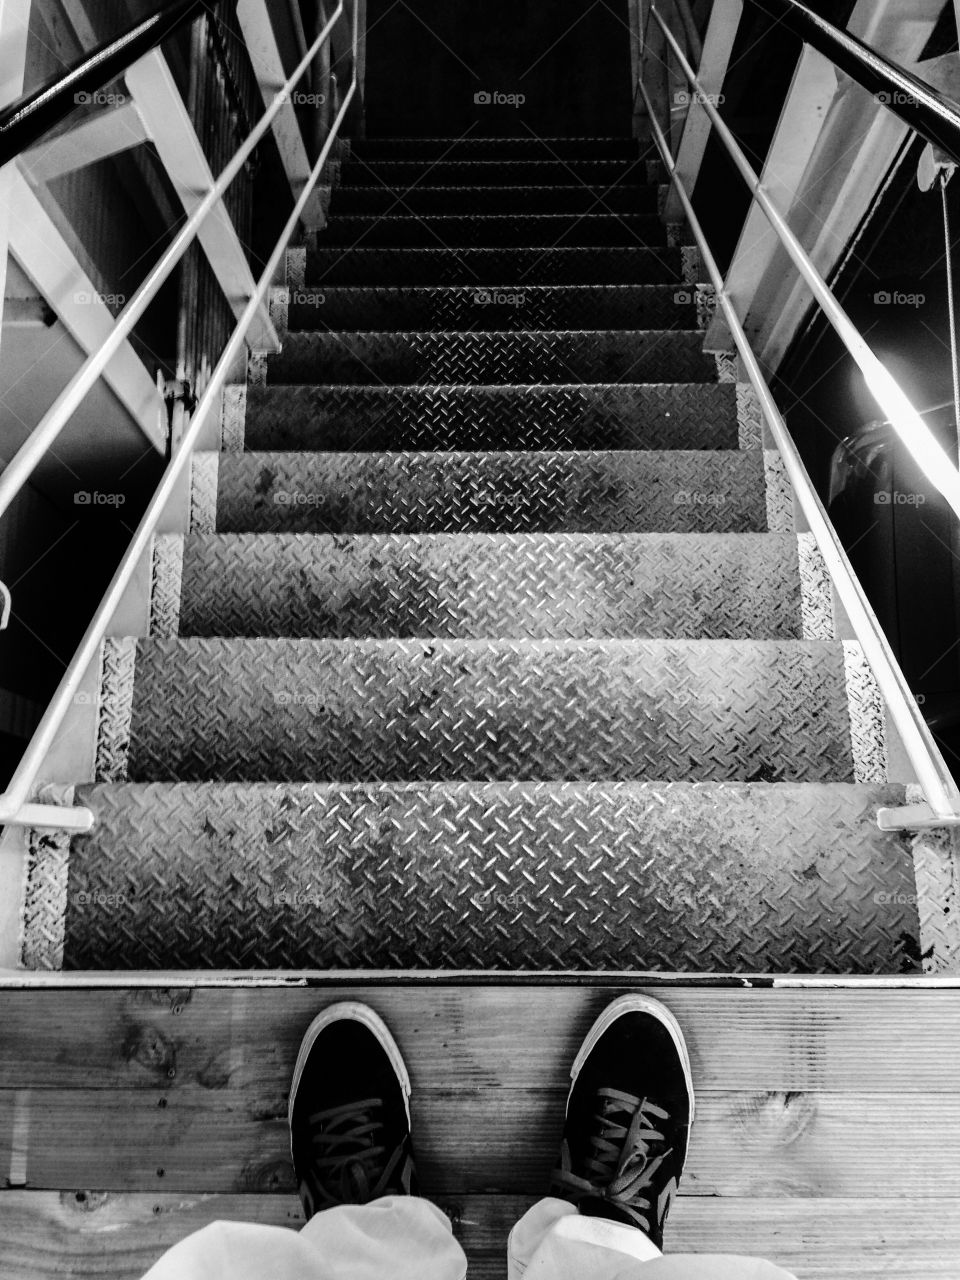 Step down 2. Stairs in a ferry named mirambeena. Black and white.